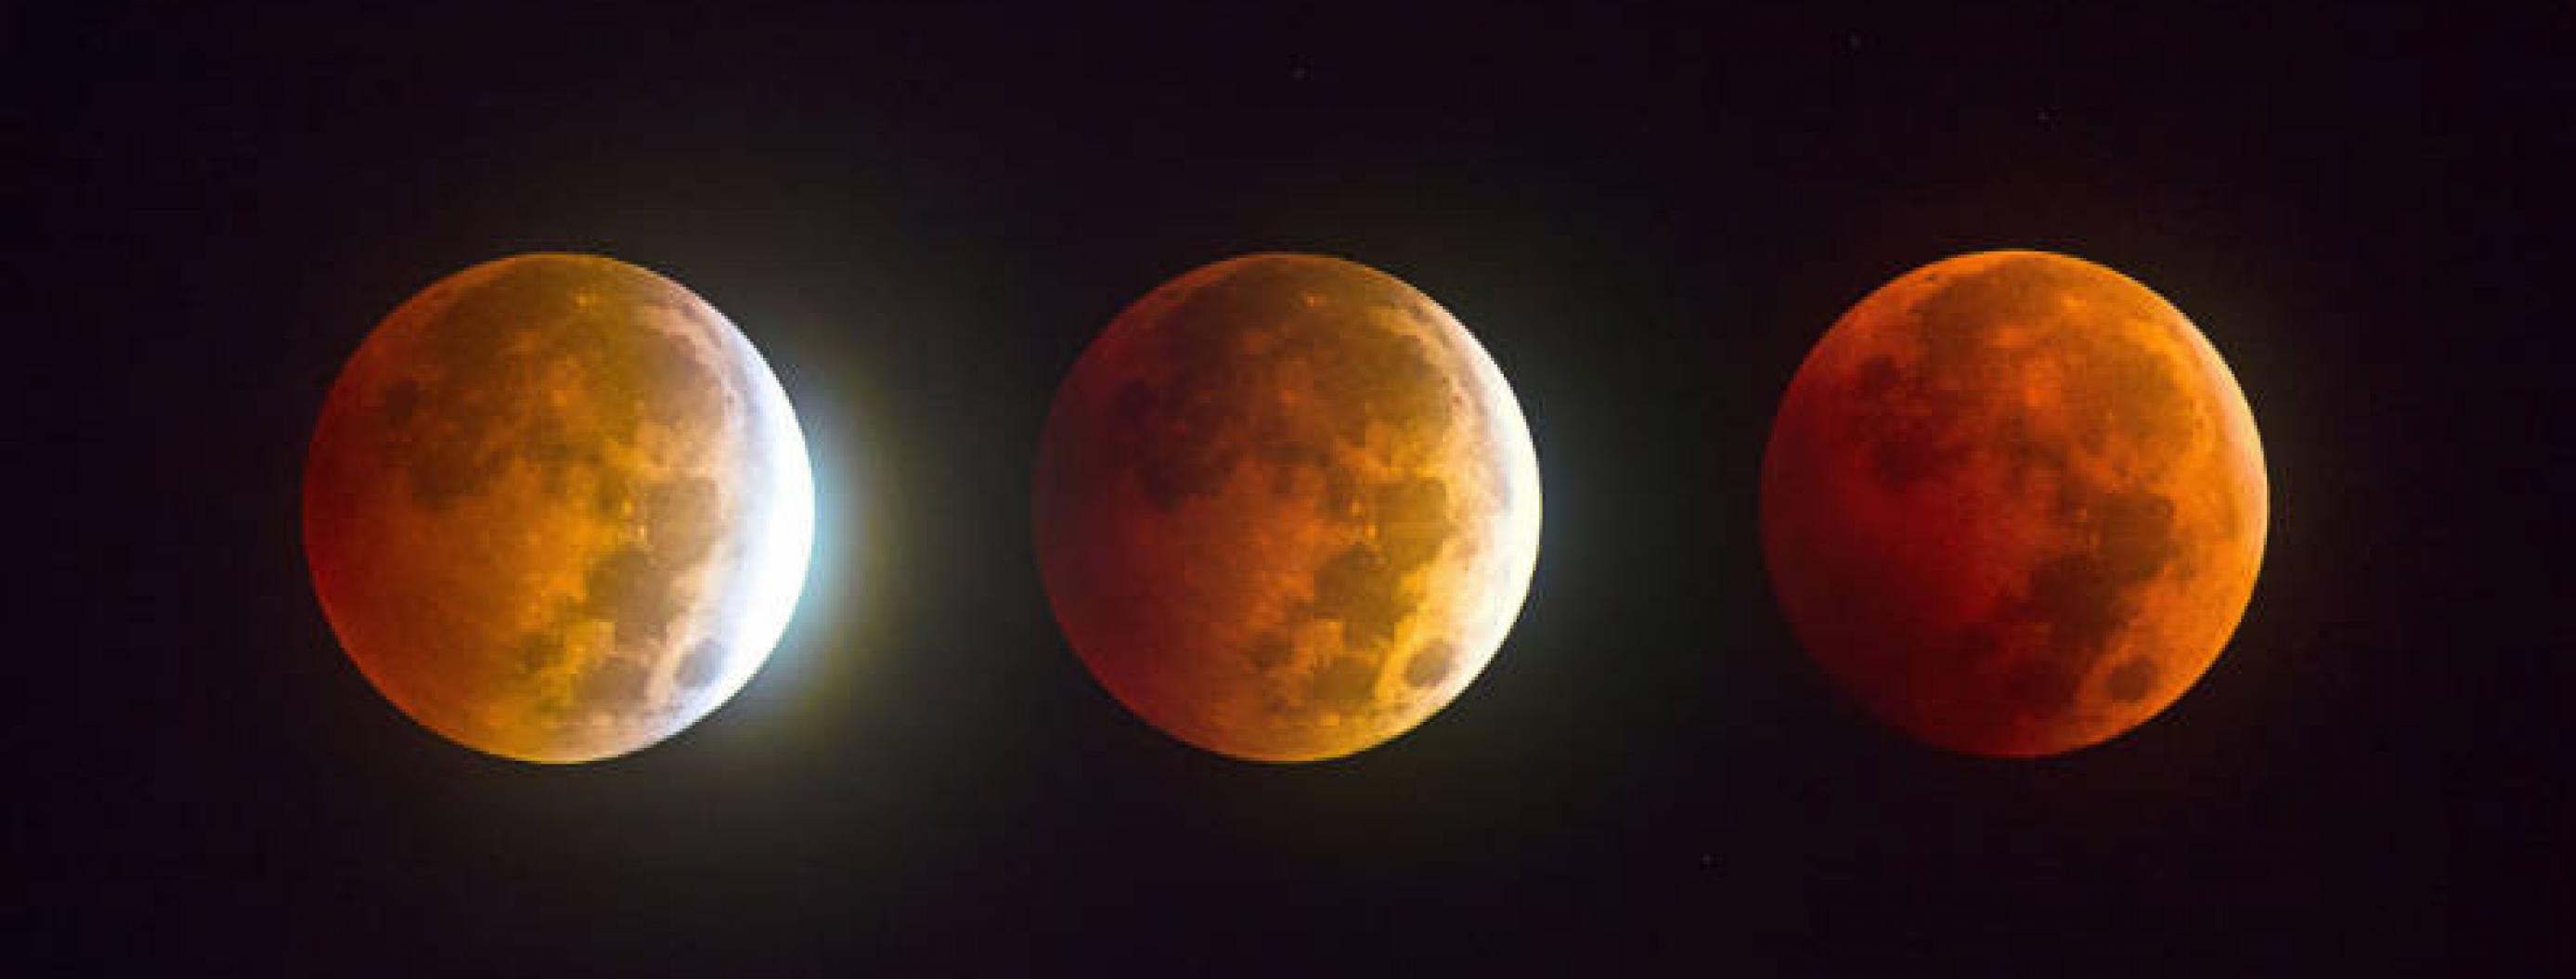 Watch The Skies 3 Rare Moon Events Will Happen At Once Culture